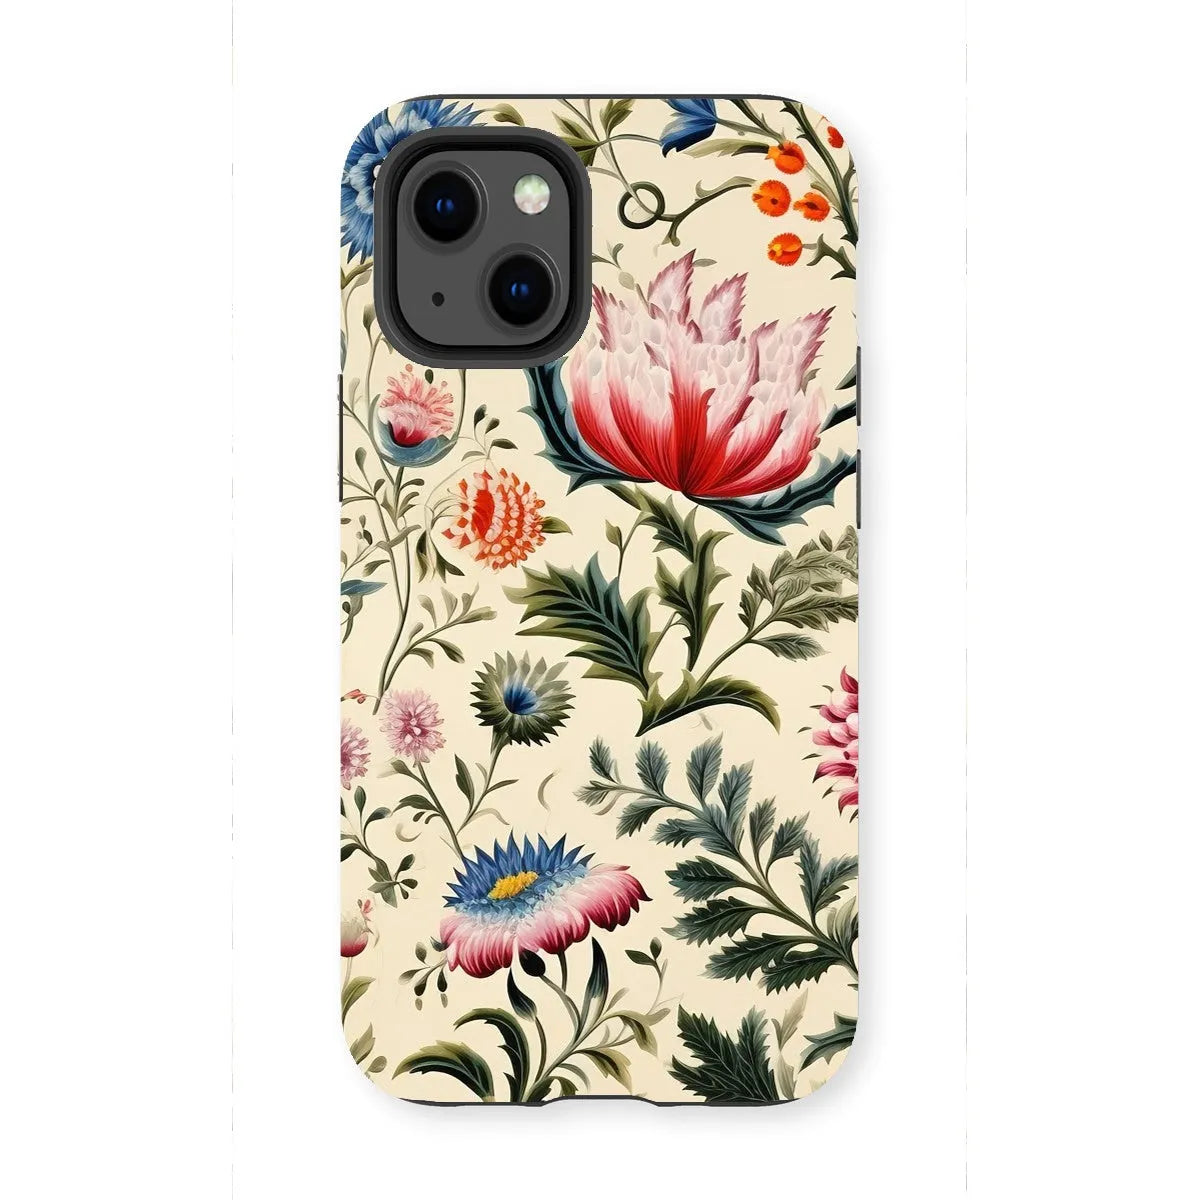 Wildflower Hoopla - Floral Garden Aesthetic Phone Case - Iphone 13 Mini / Matte - Mobile Phone Cases - Aesthetic Art